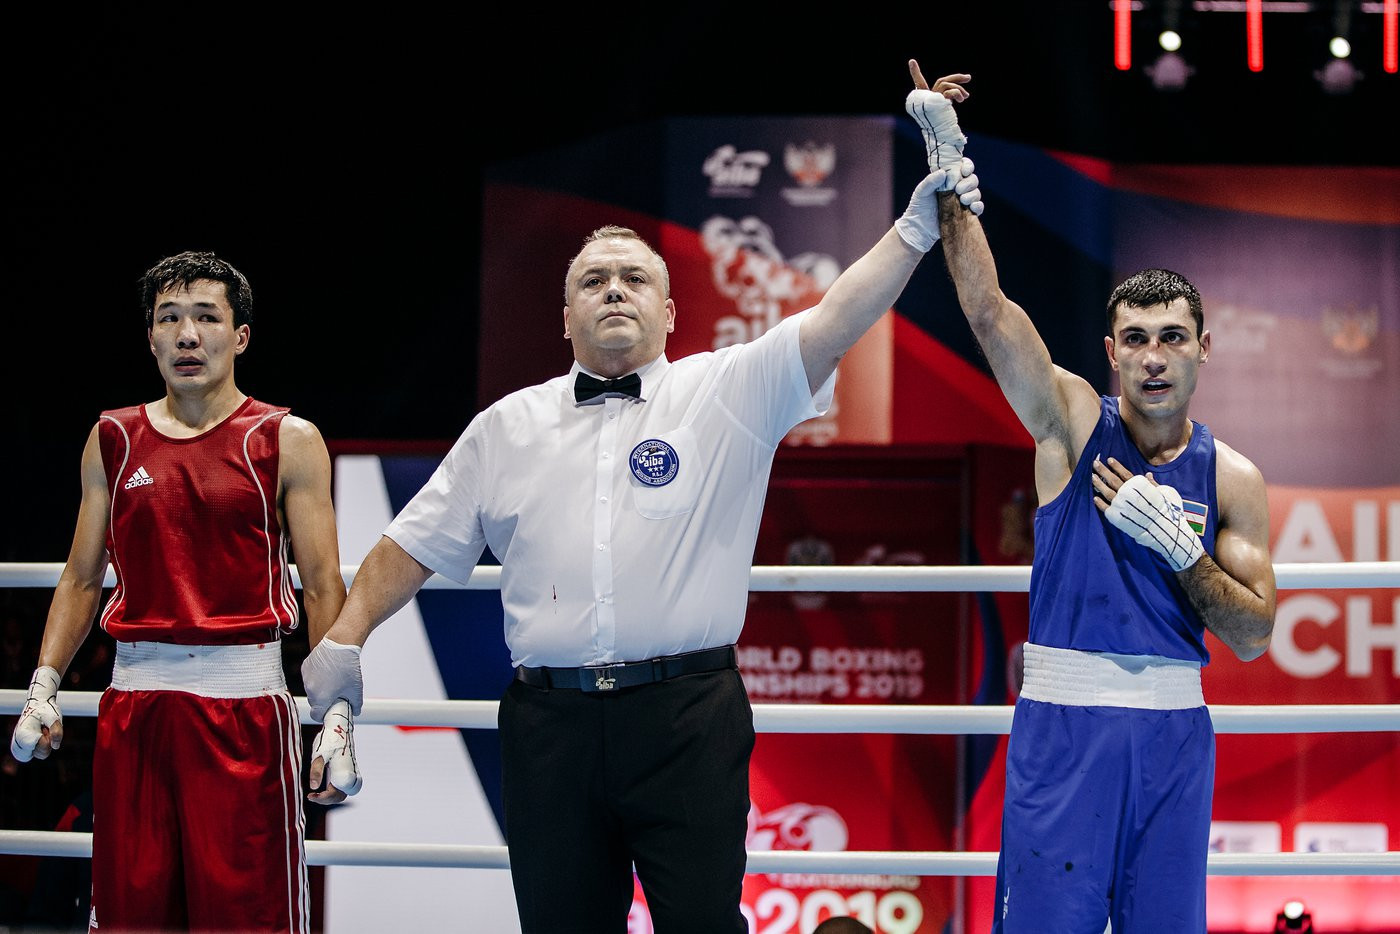 AIBA Men's World Championships 2019: Day 10 of competition